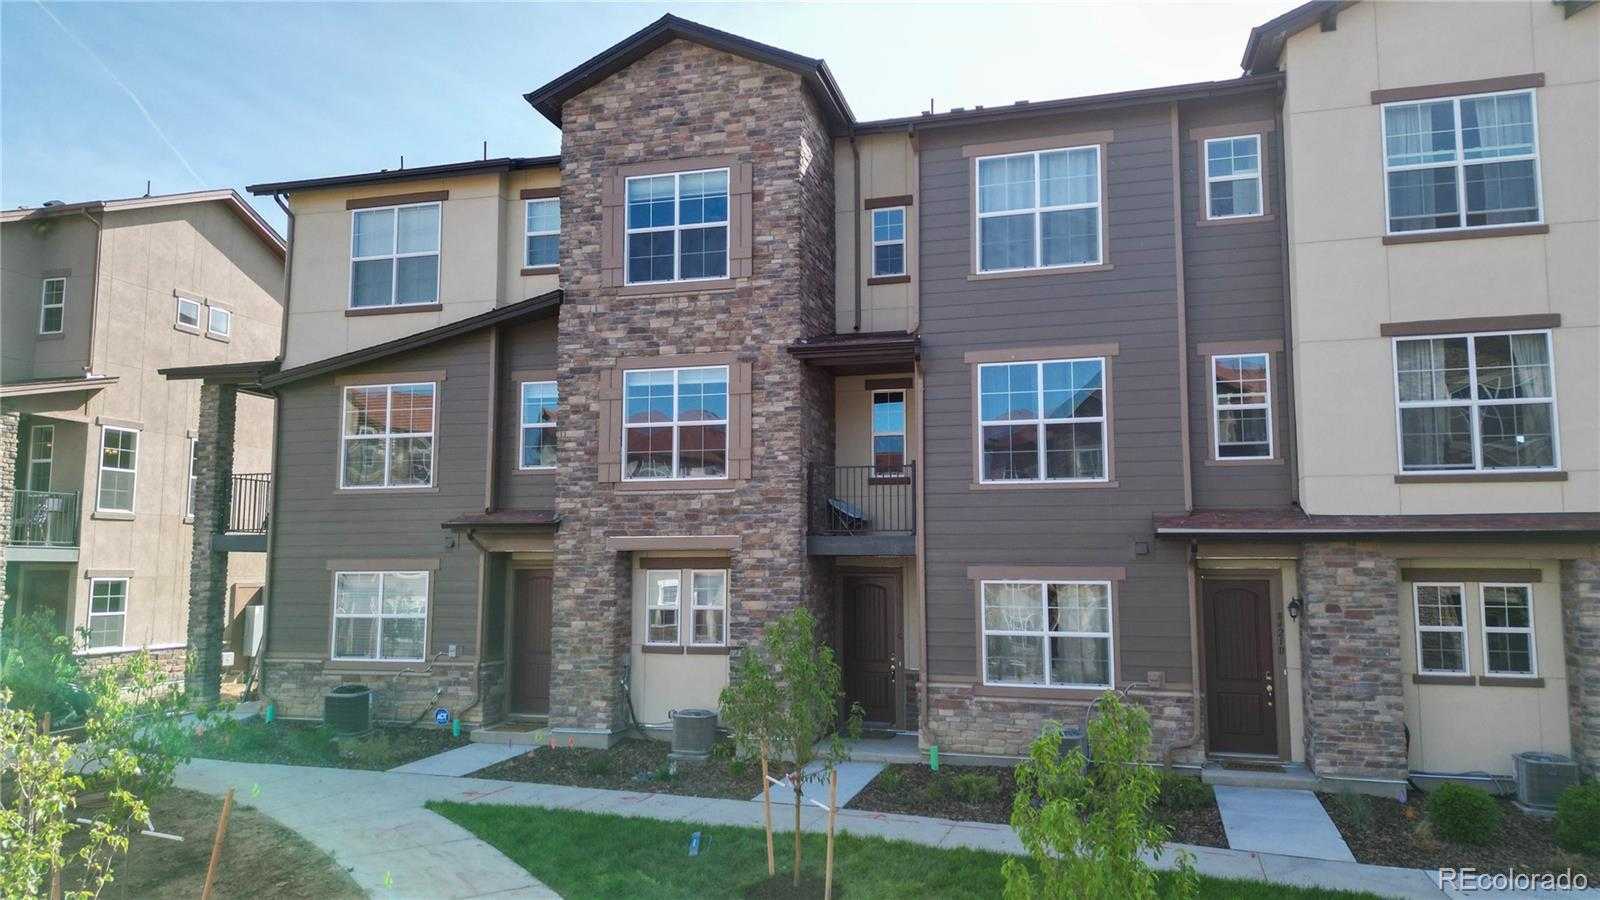 View Highlands Ranch, CO 80129 multi-family property